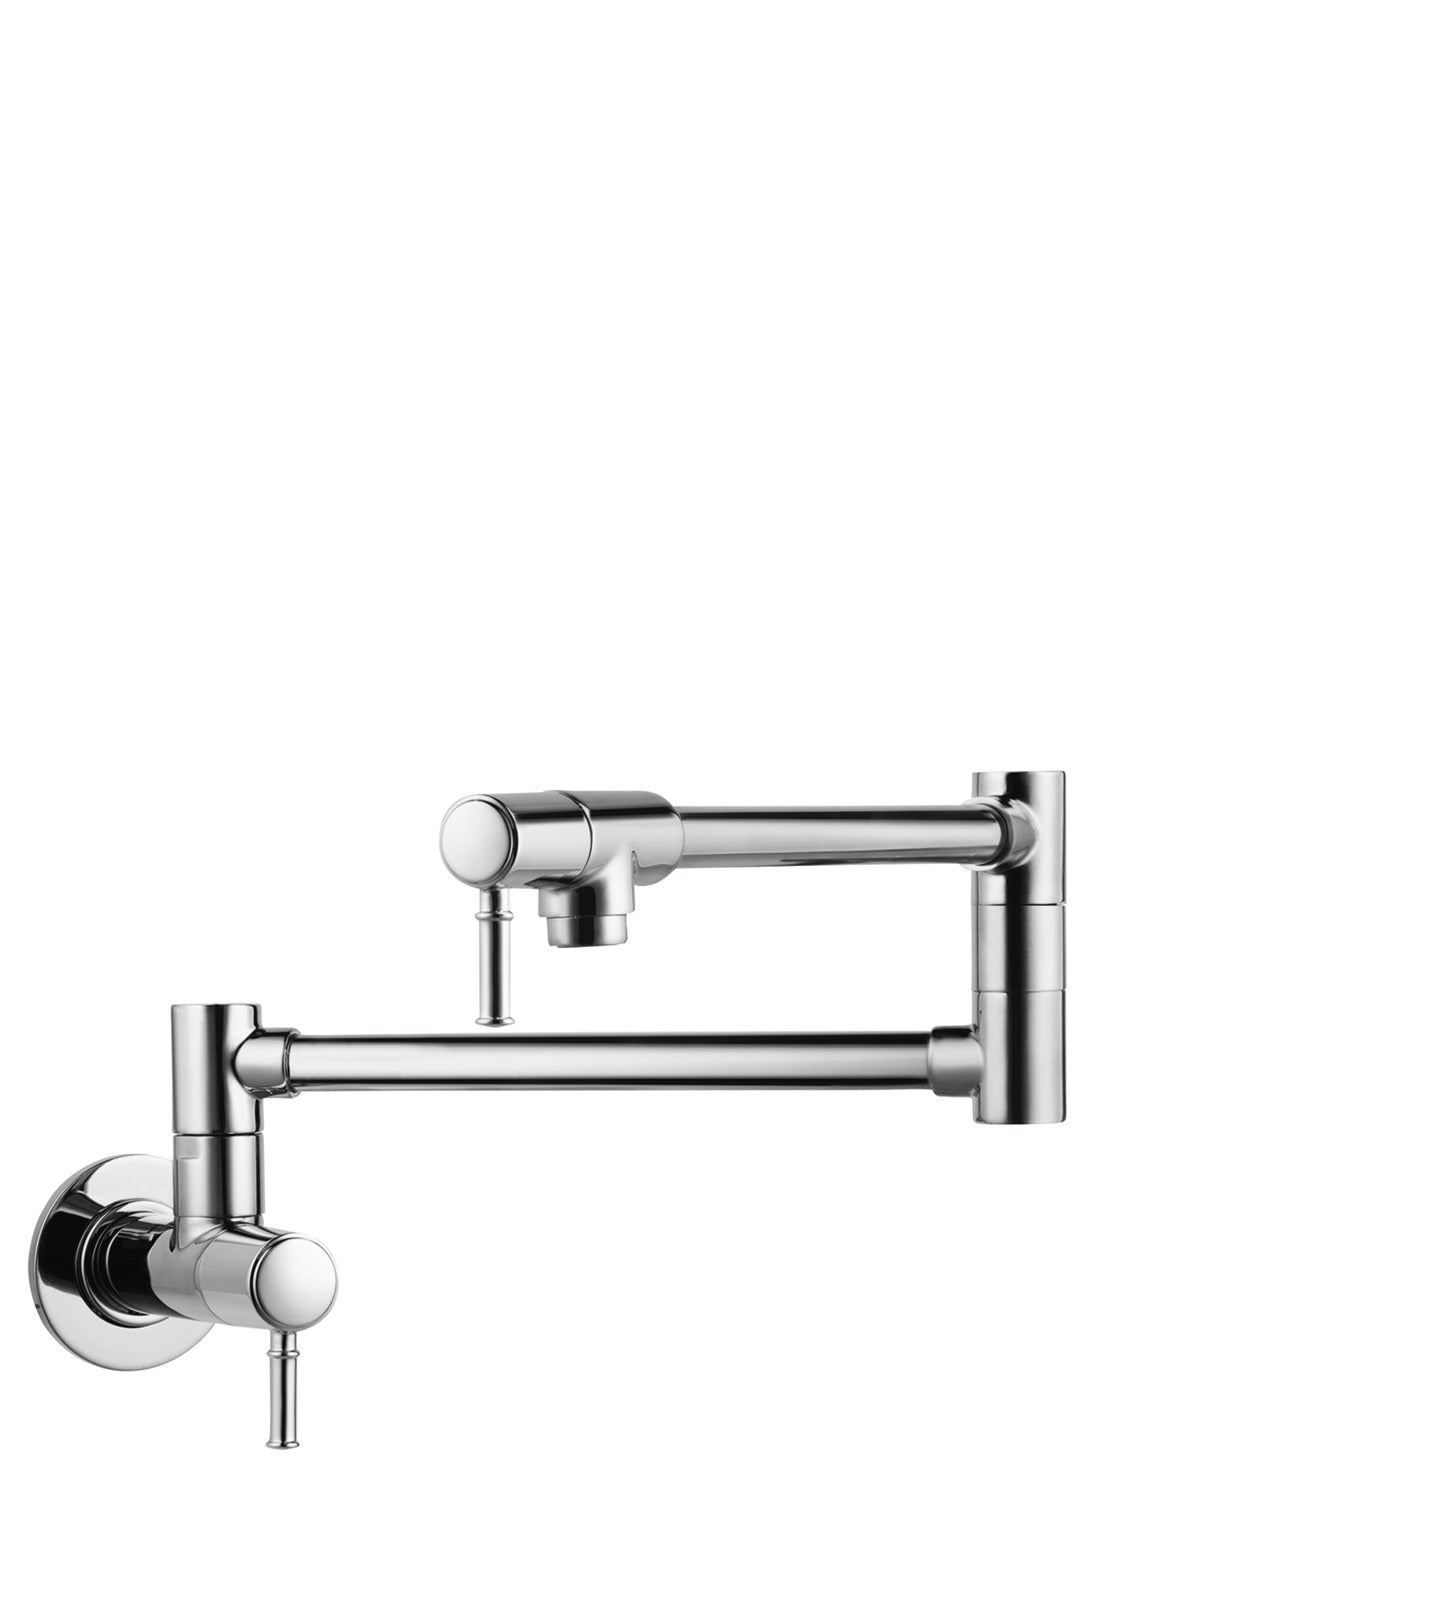 HANSGROHE 04218000 Chrome Talis C Classic Kitchen Faucet 2.5 GPM